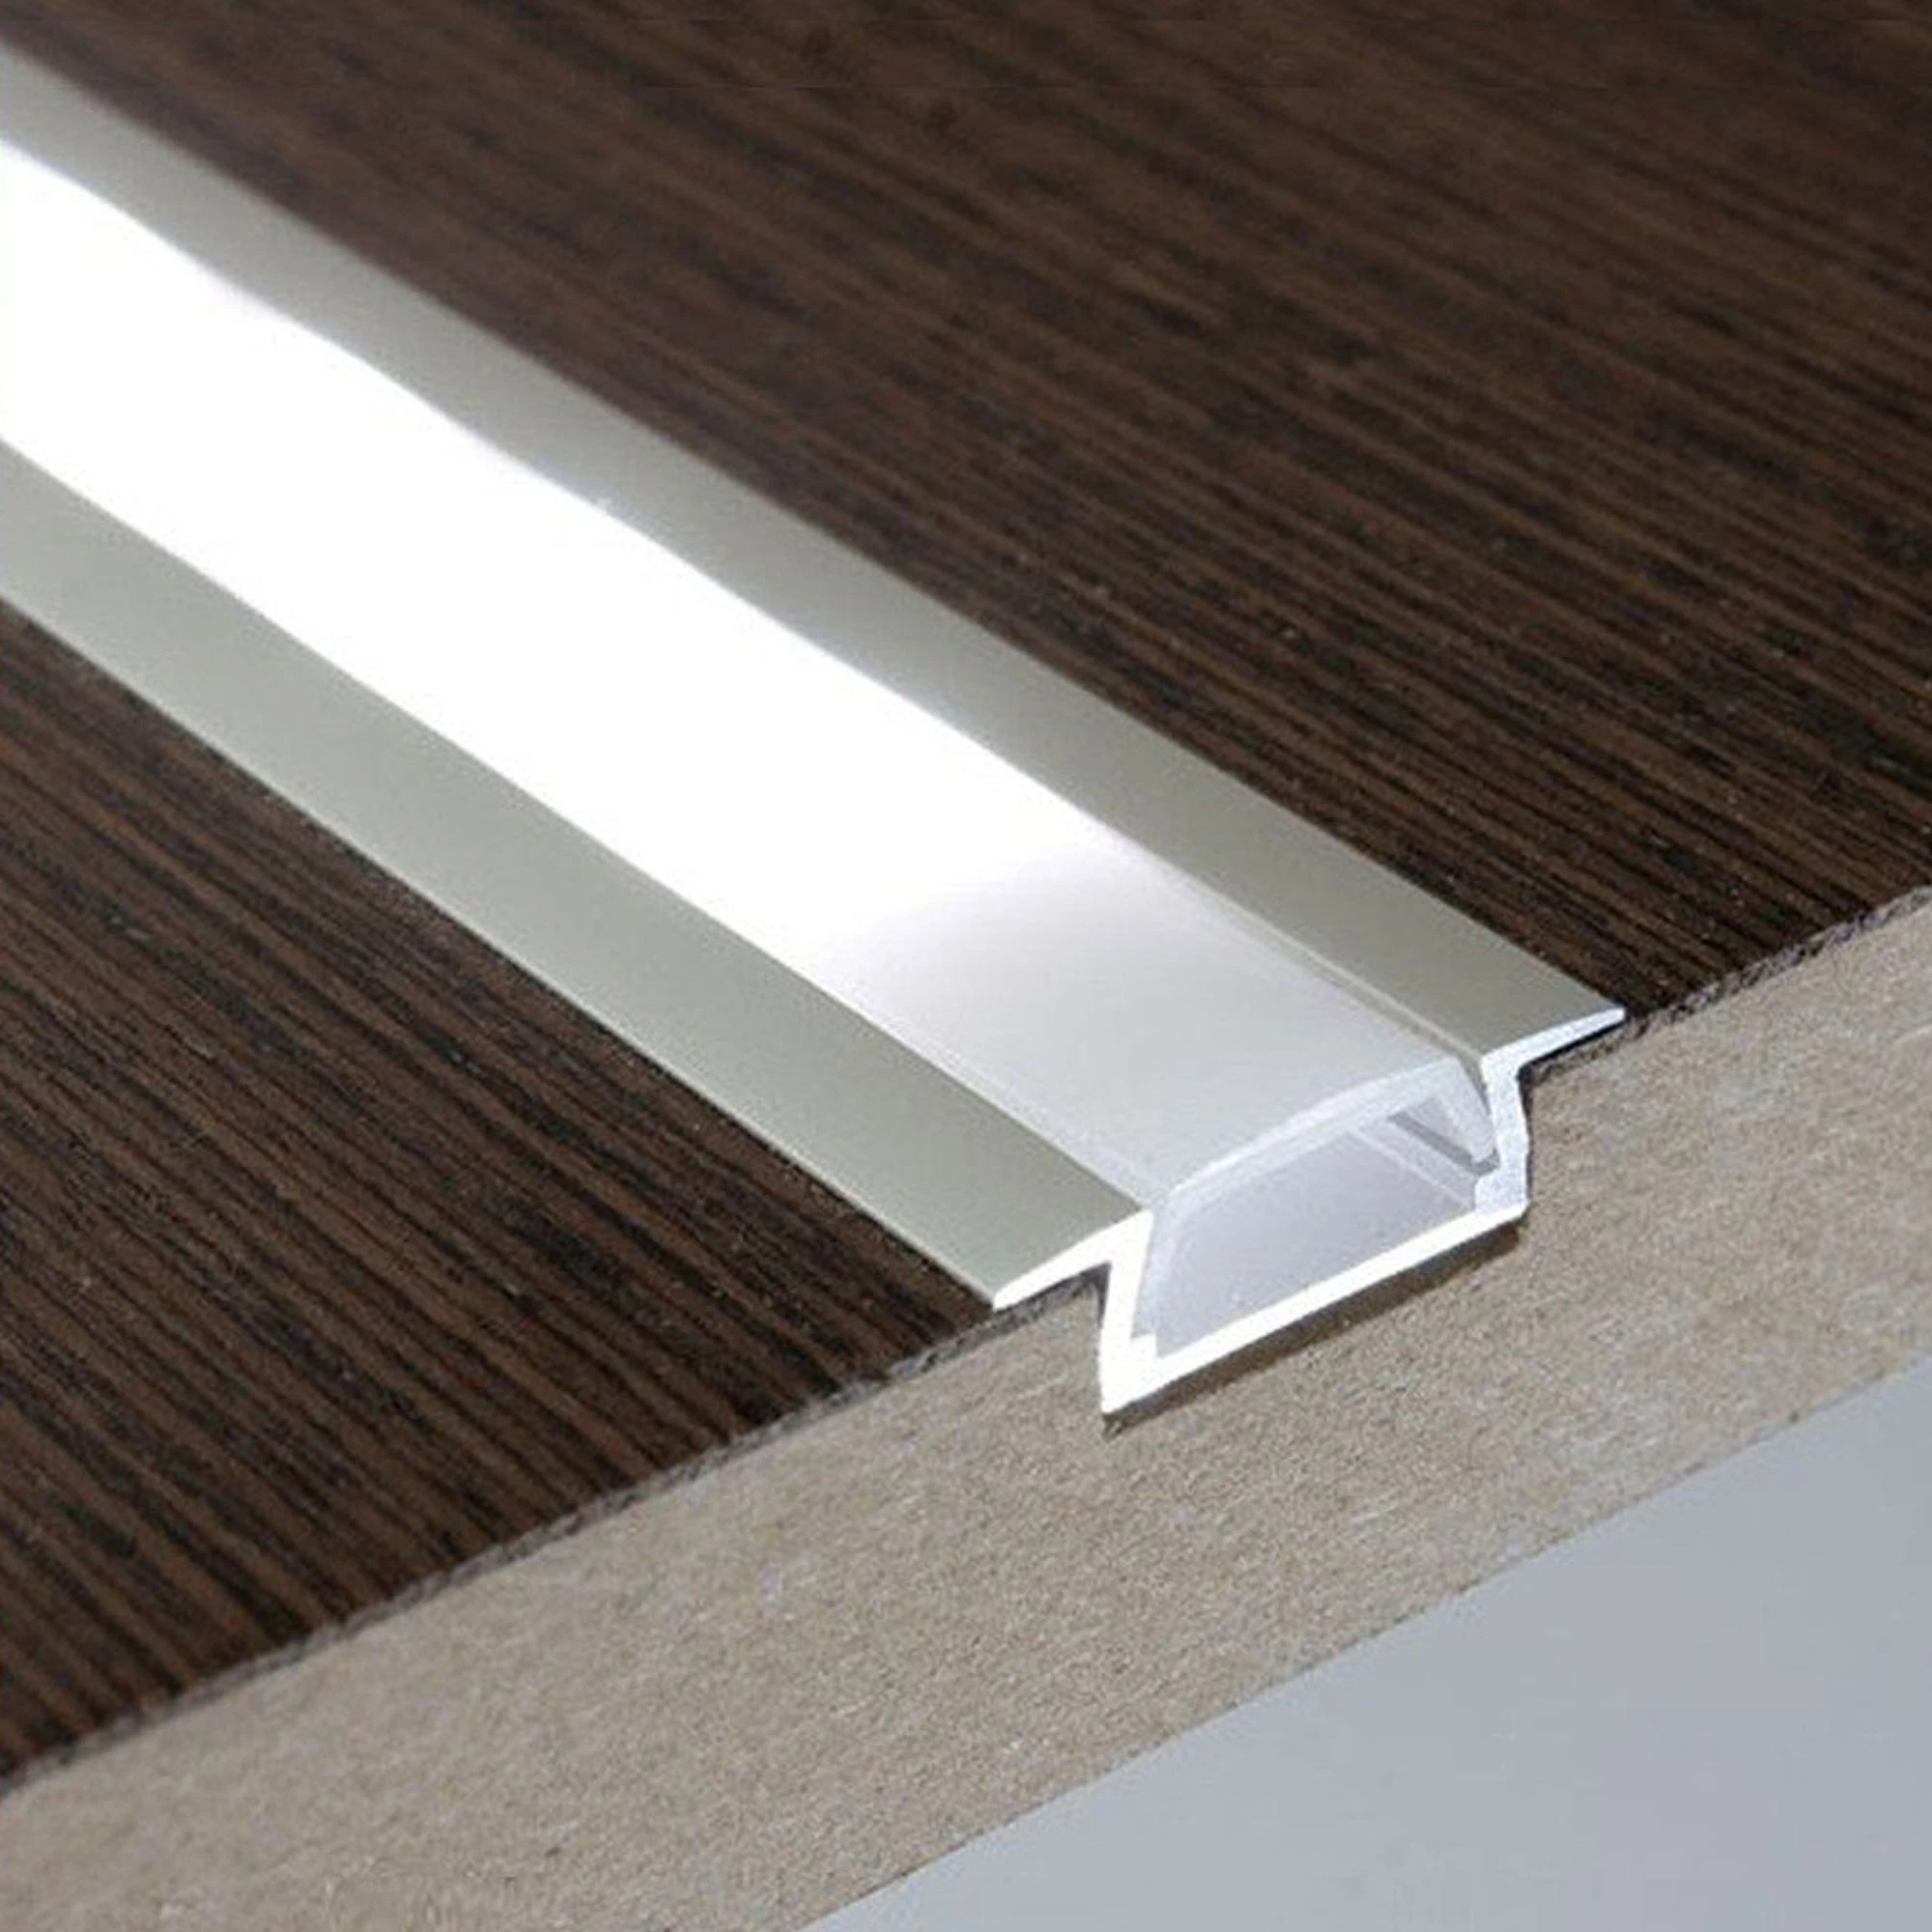 Transparent Clear Frosted Diffuser Silver Black Anodized Aluminium Profile Extrusion Channel for LED Strip Light